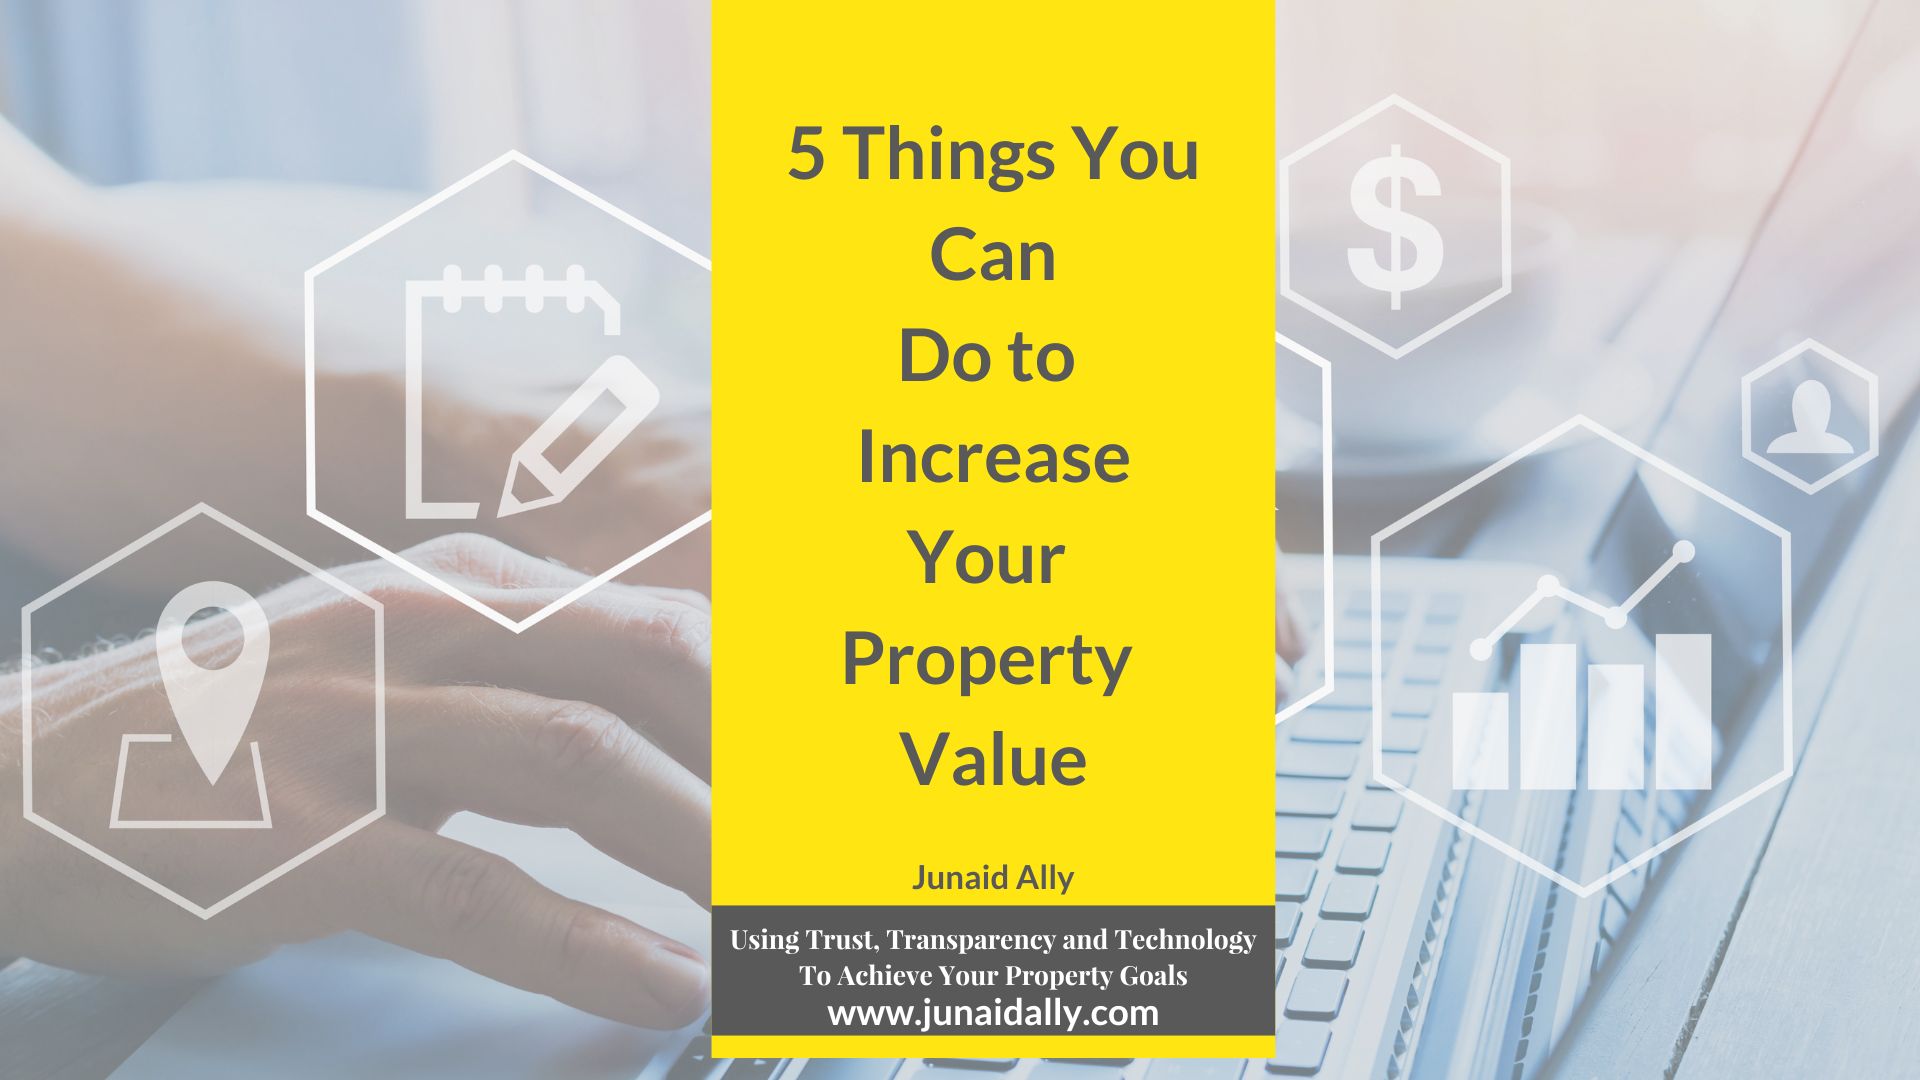 5 Things You Can Do to Increase Your Property Value